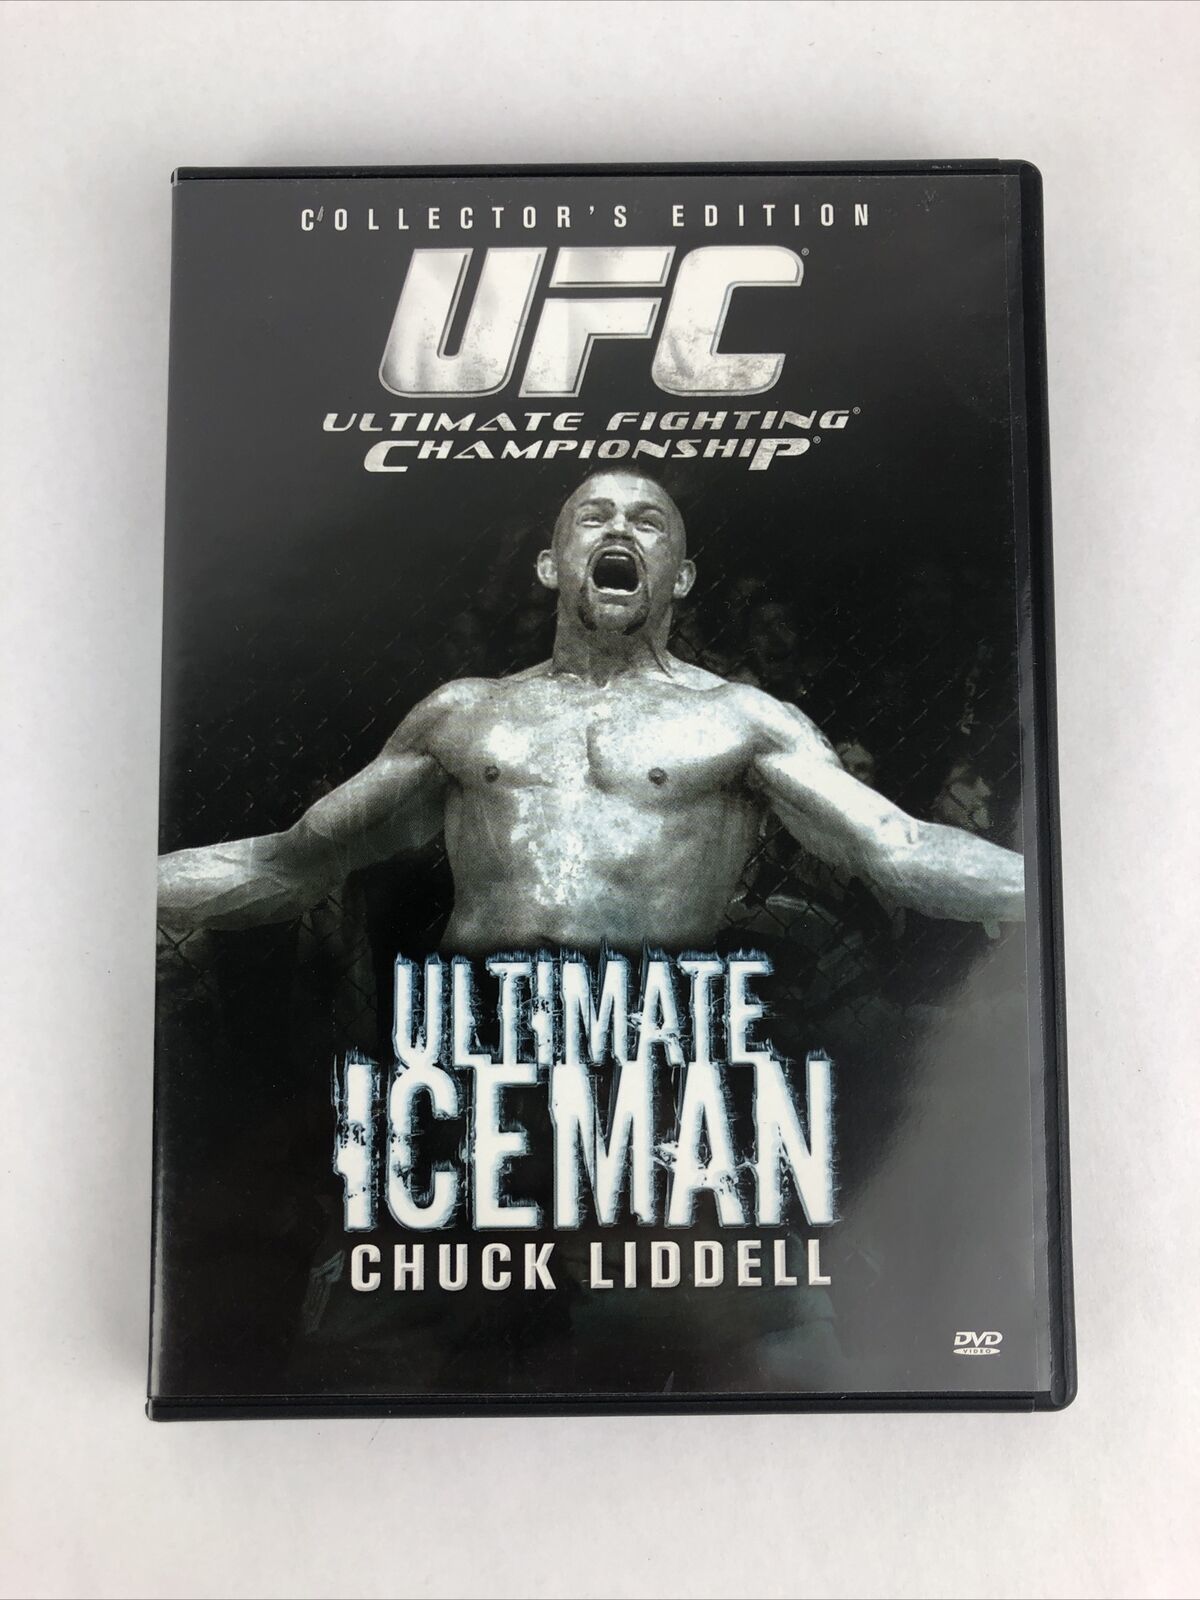 Primary image for ULTIMATE FIGHTING CHAMPIONSHIP - ULTIMATE ICEMAN - CHUCK LIDDELL DVD Mint Disc